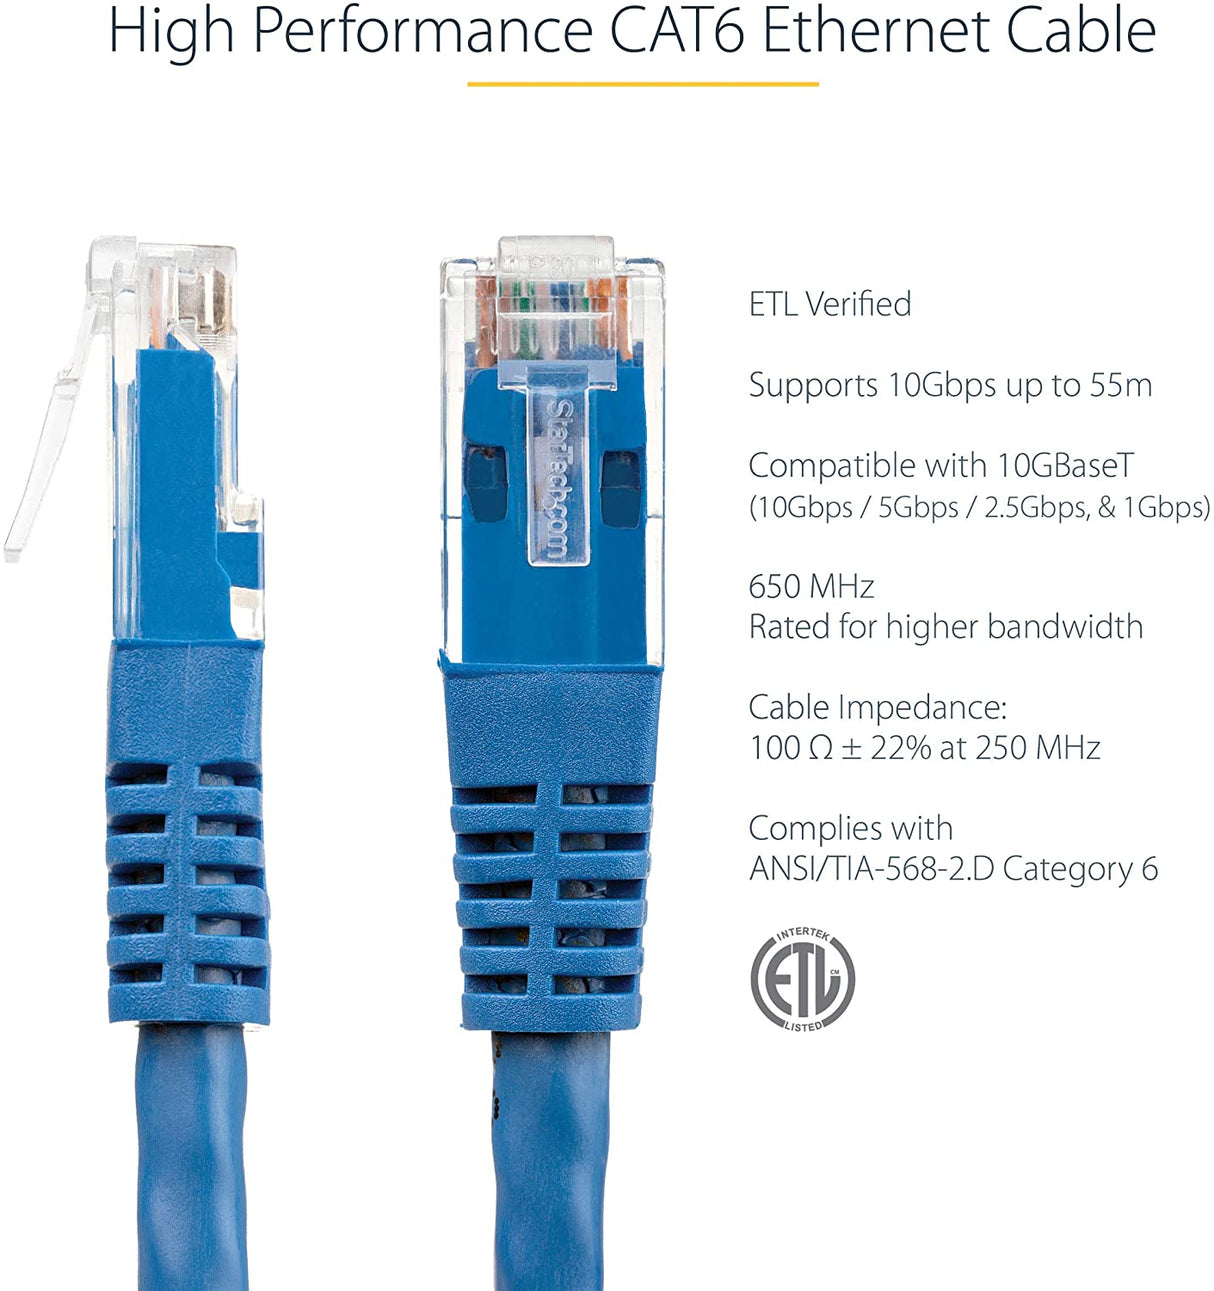 StarTech.com 5ft CAT6 Ethernet Cable - Blue CAT 6 Gigabit Ethernet Wire -650MHz 100W PoE++ RJ45 UTP Molded Category 6 Network/Patch Cord w/Strain Relief/Fluke Tested UL/TIA Certified (C6PATCH5BL) Blue 5 ft / 1.5 m 1 Pack